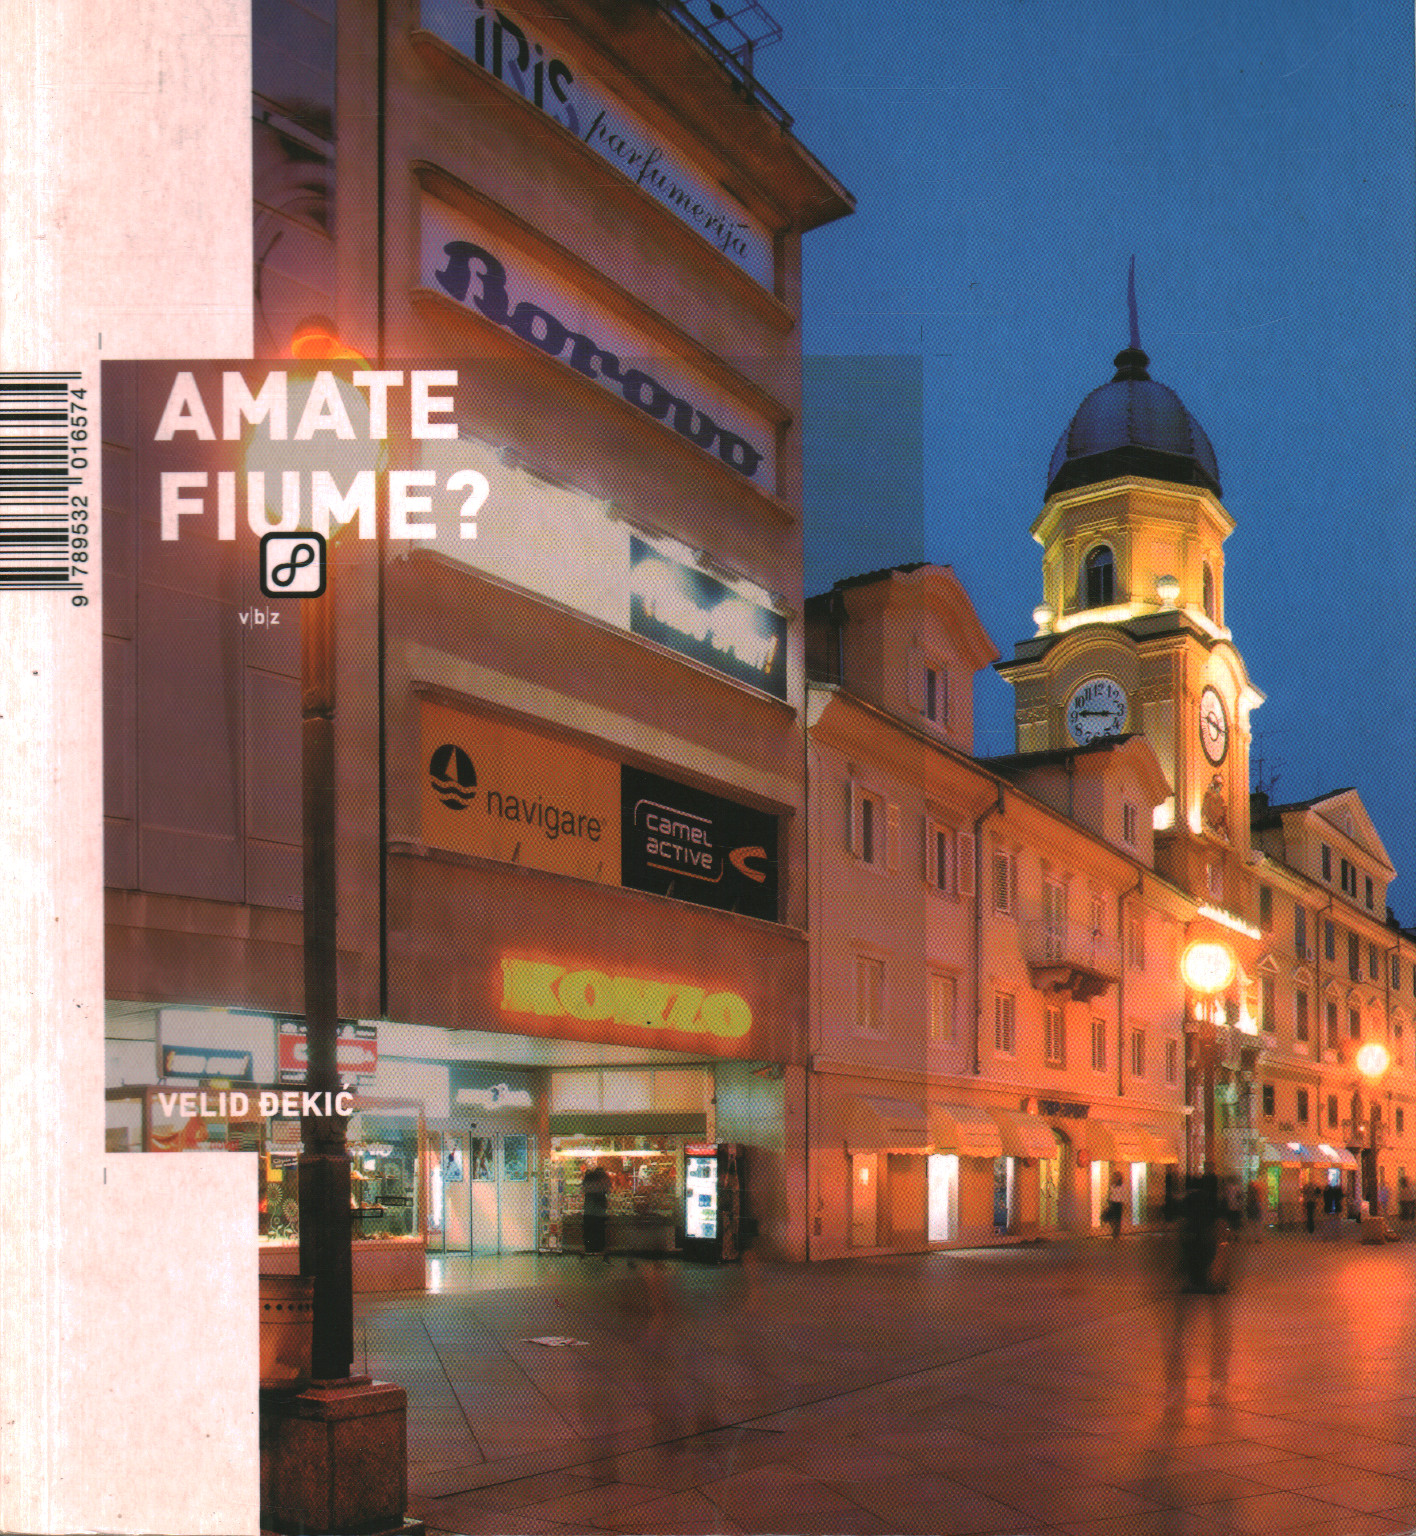 Amate Fiume?, s.a.